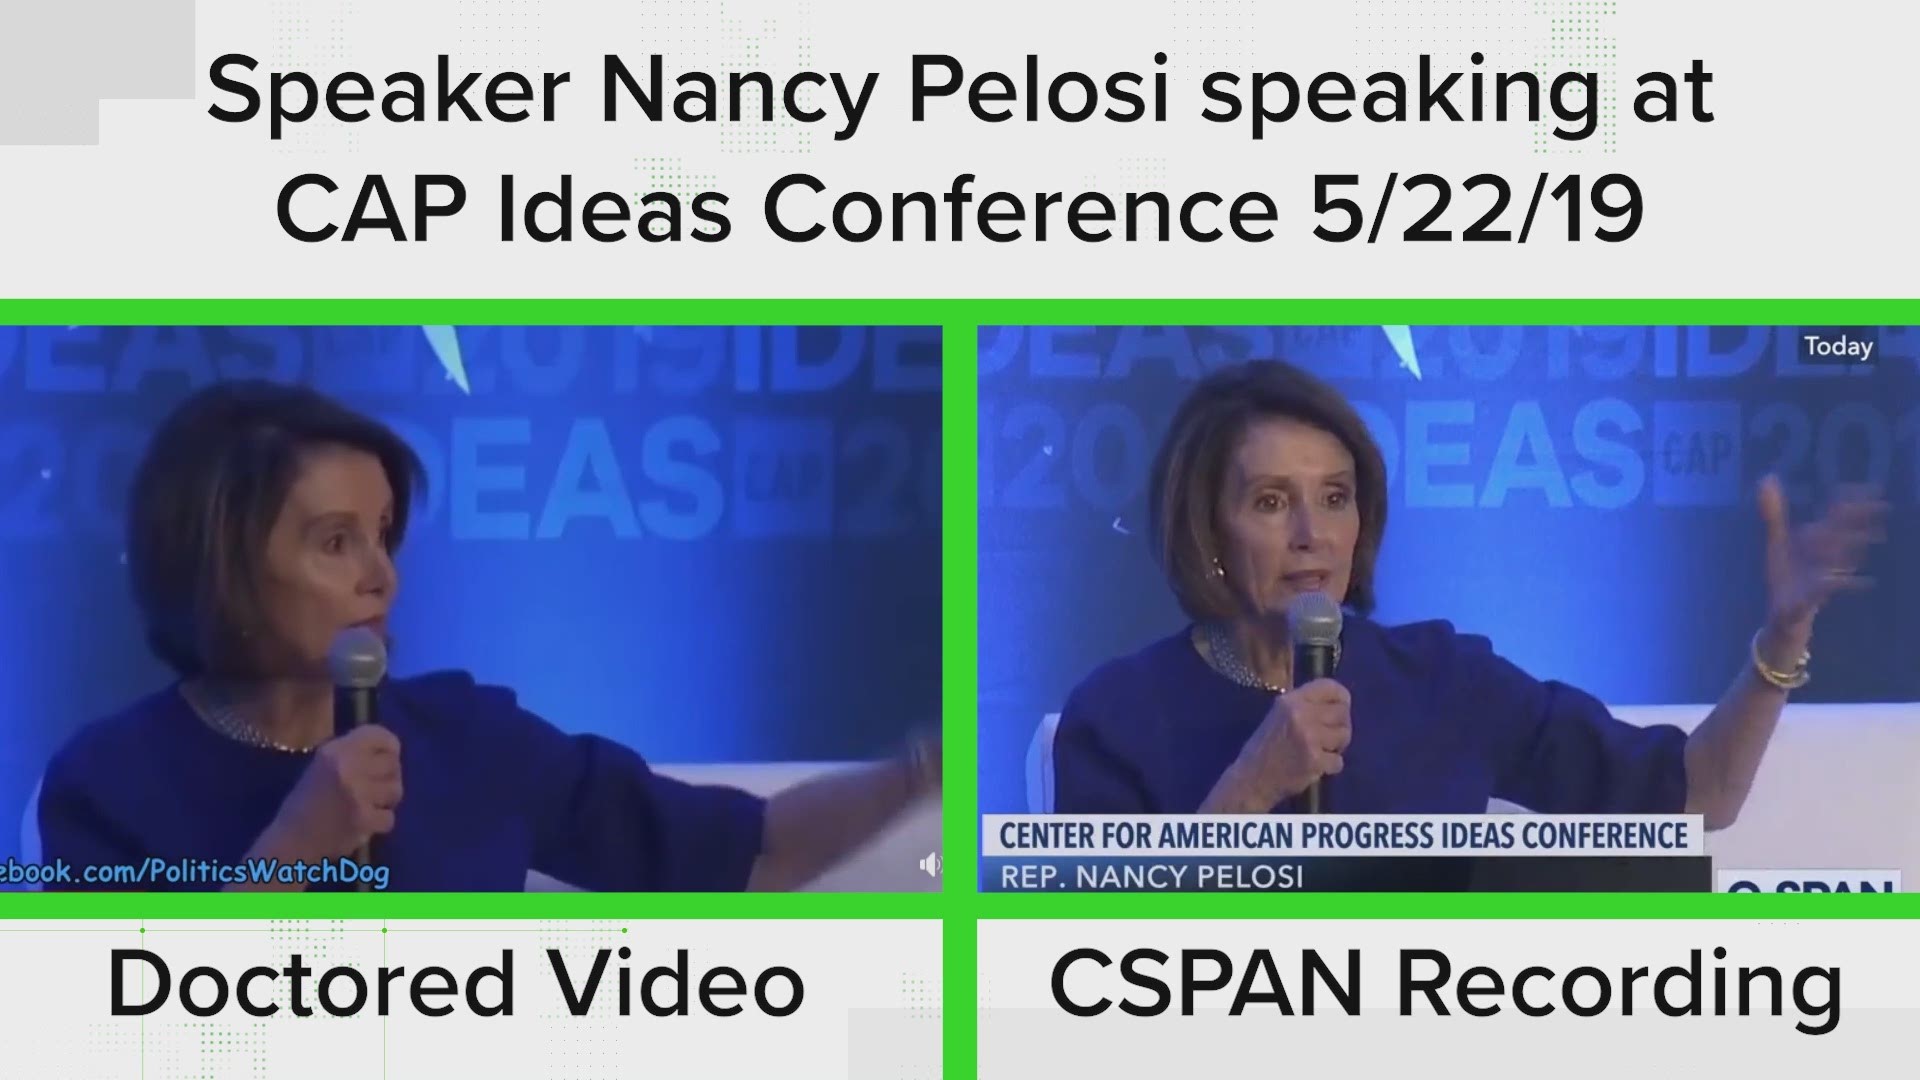 A doctored video of Nancy Pelosi was shared on social media. It took footage from her speech at the CAP Ideas Conference and slowed it down to make her speech appear slurred.